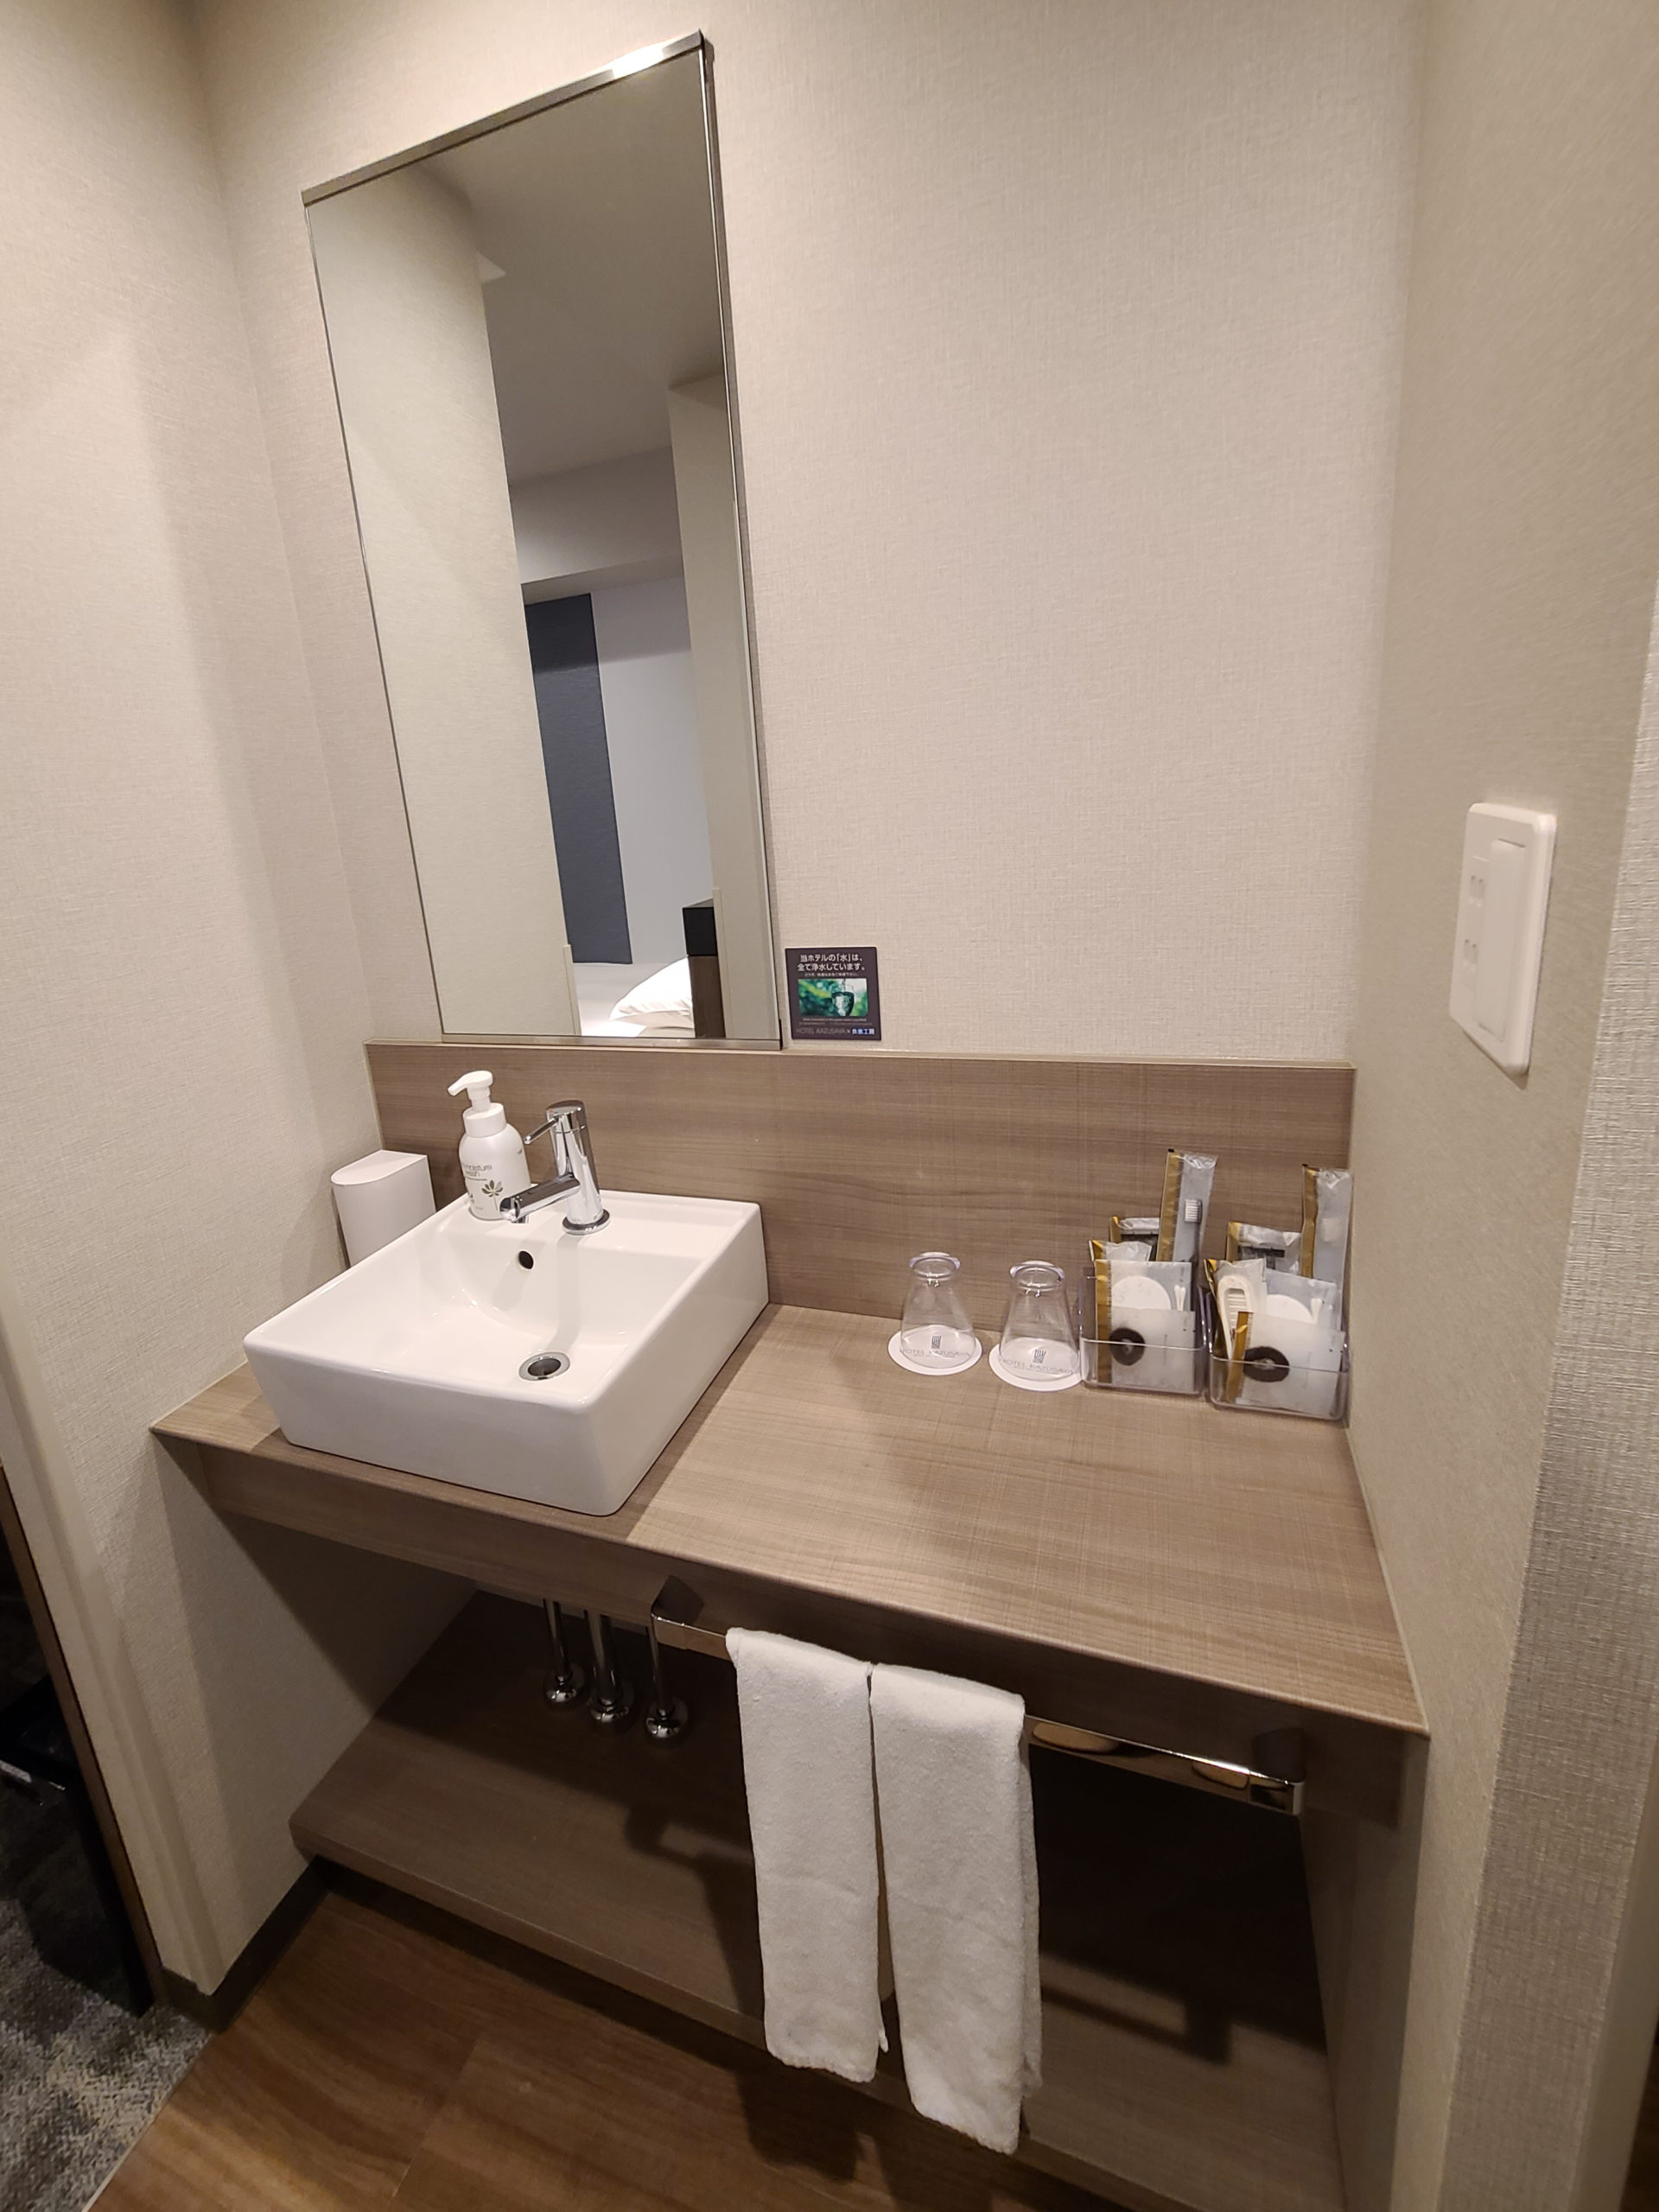 This room has a separate shower, toilet, and sink